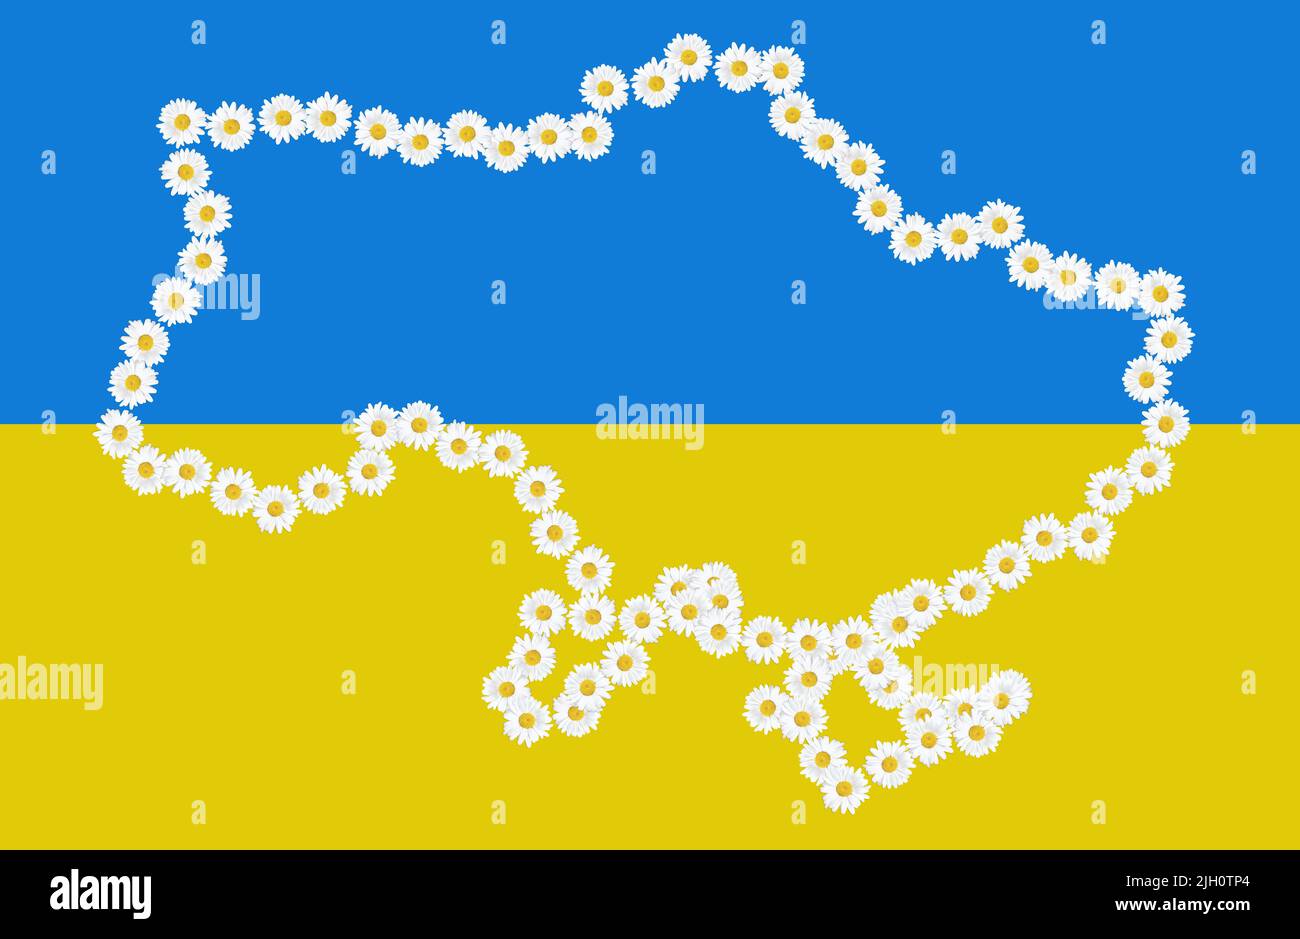 Ukraine map outline made from daisy heads against the national flag background. Patriotic concept. Stock Photo